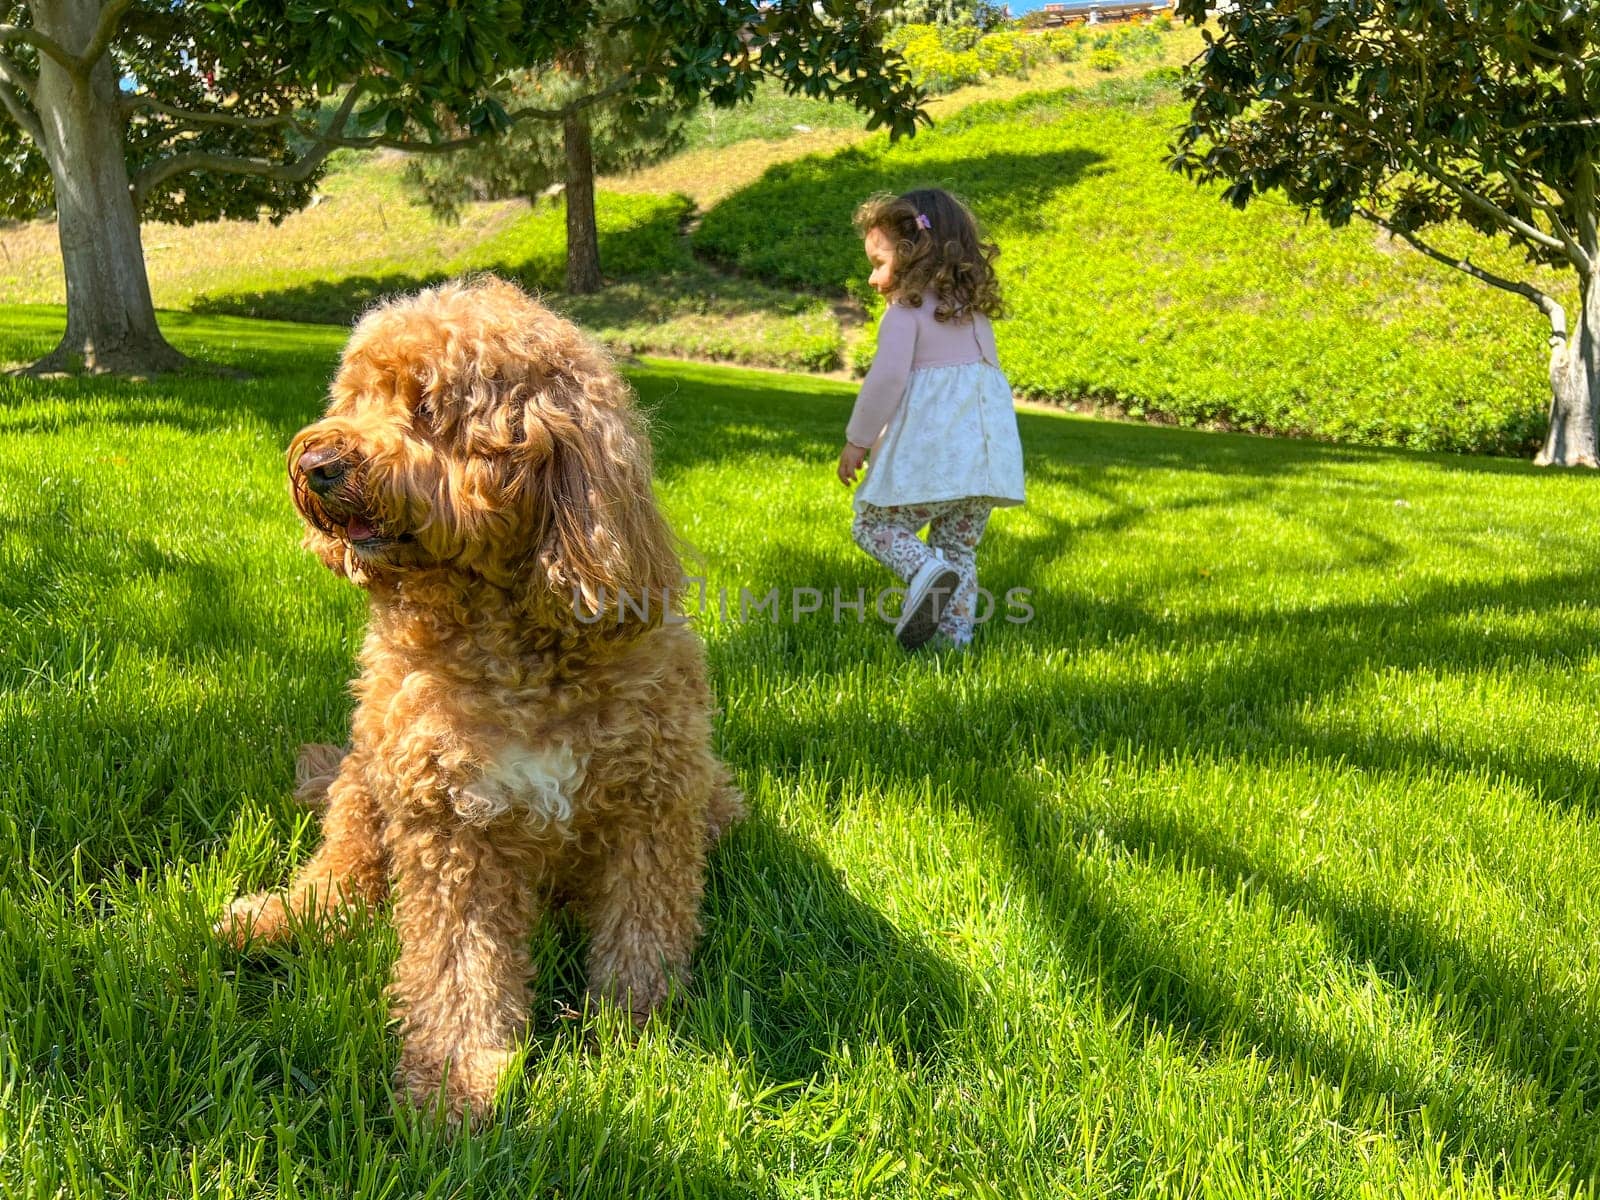 Cute Fluffy Cavapoo Dog with girl running on the background on the Grass in a Park